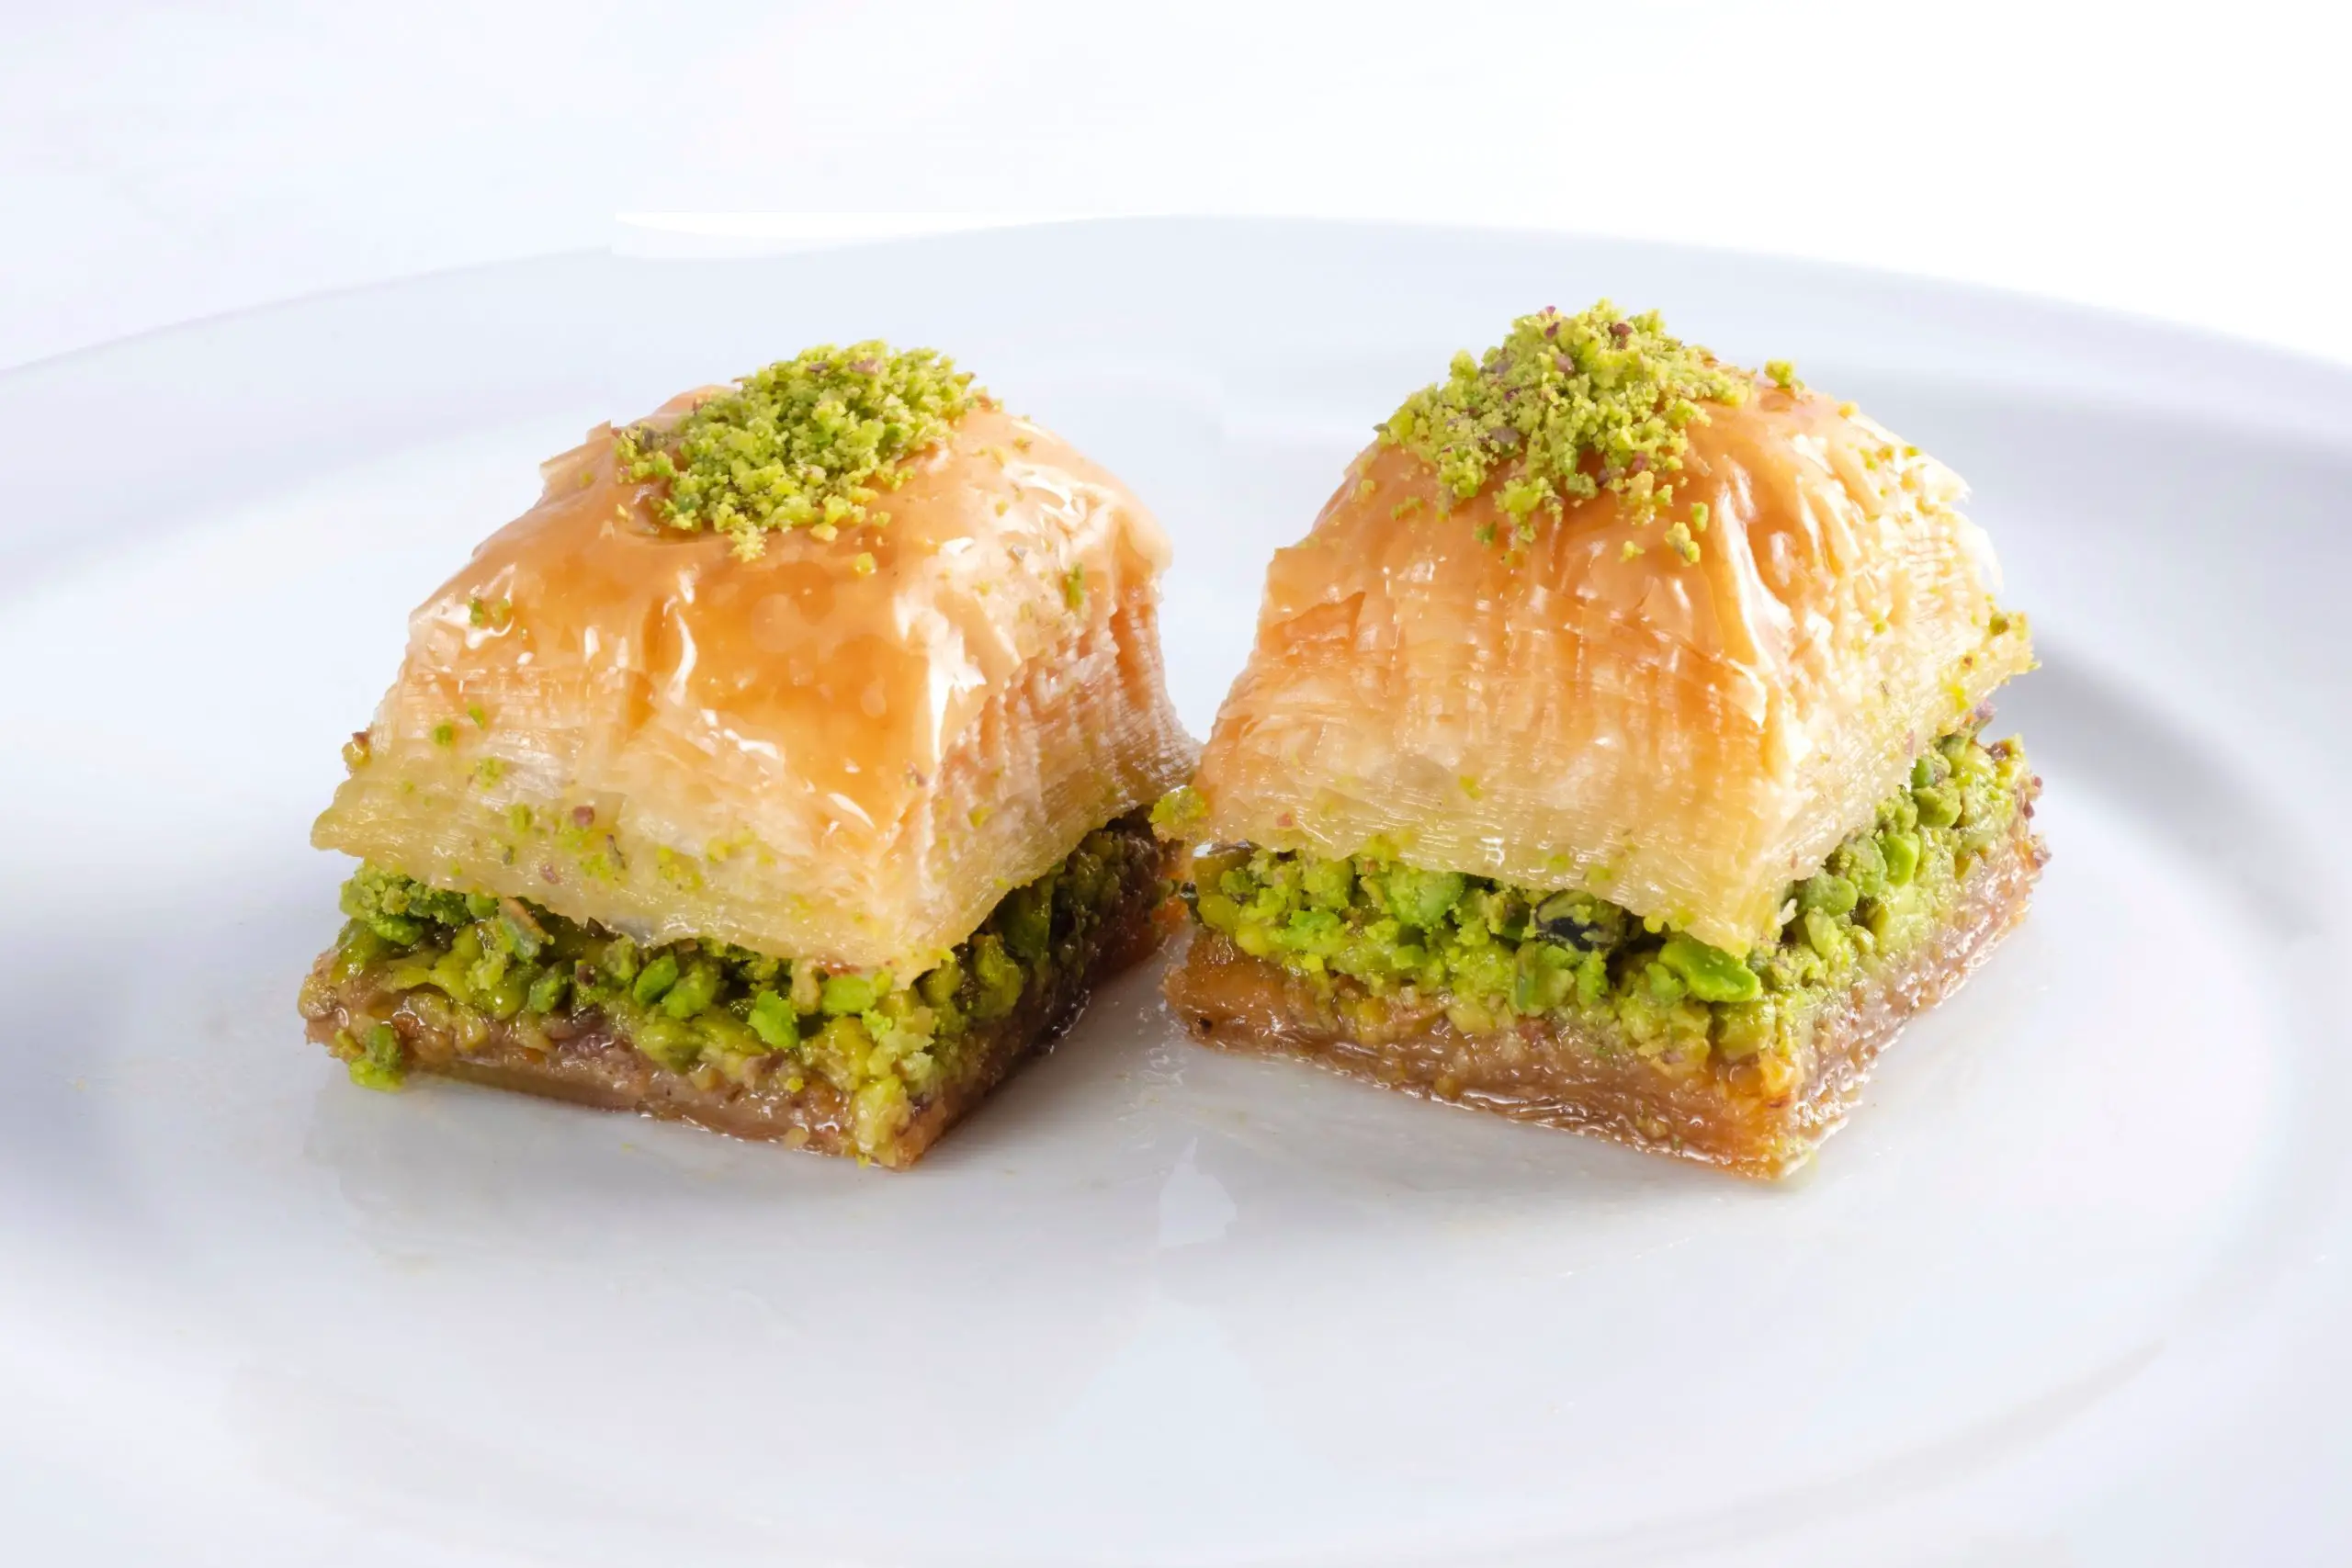 How to Store Baklava